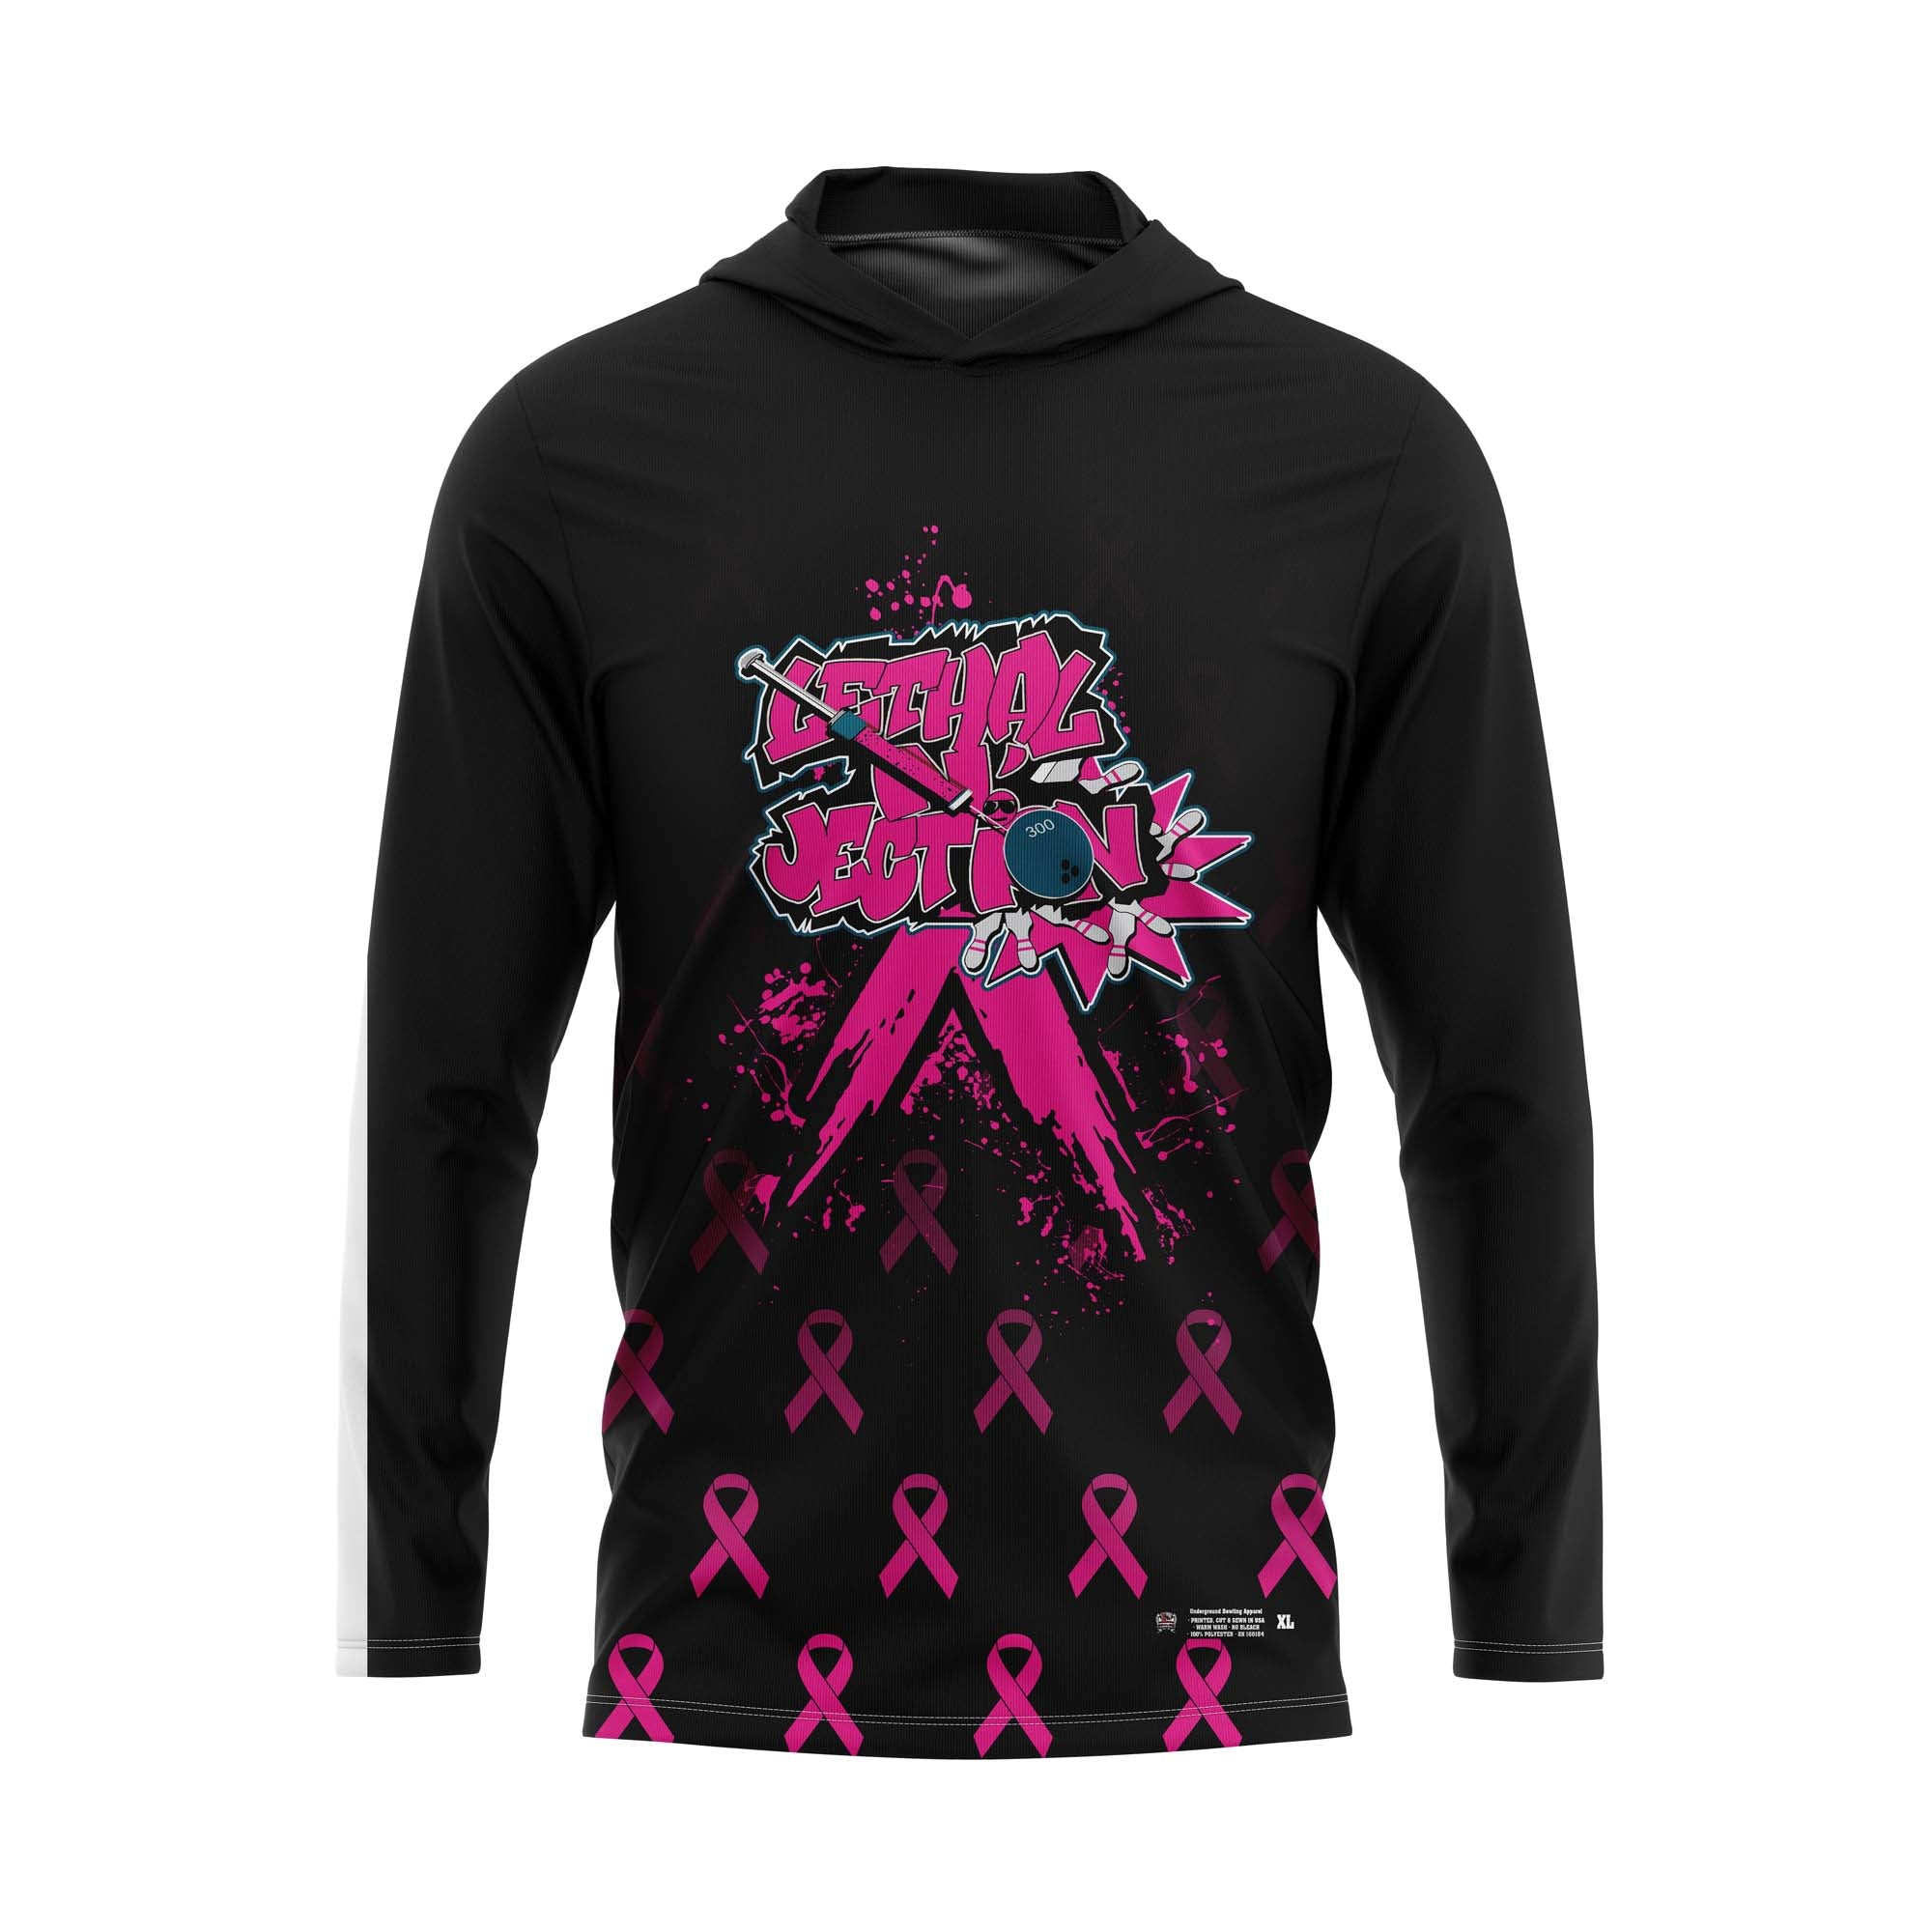 Lethal N'jection Breast Cancer Jerseys